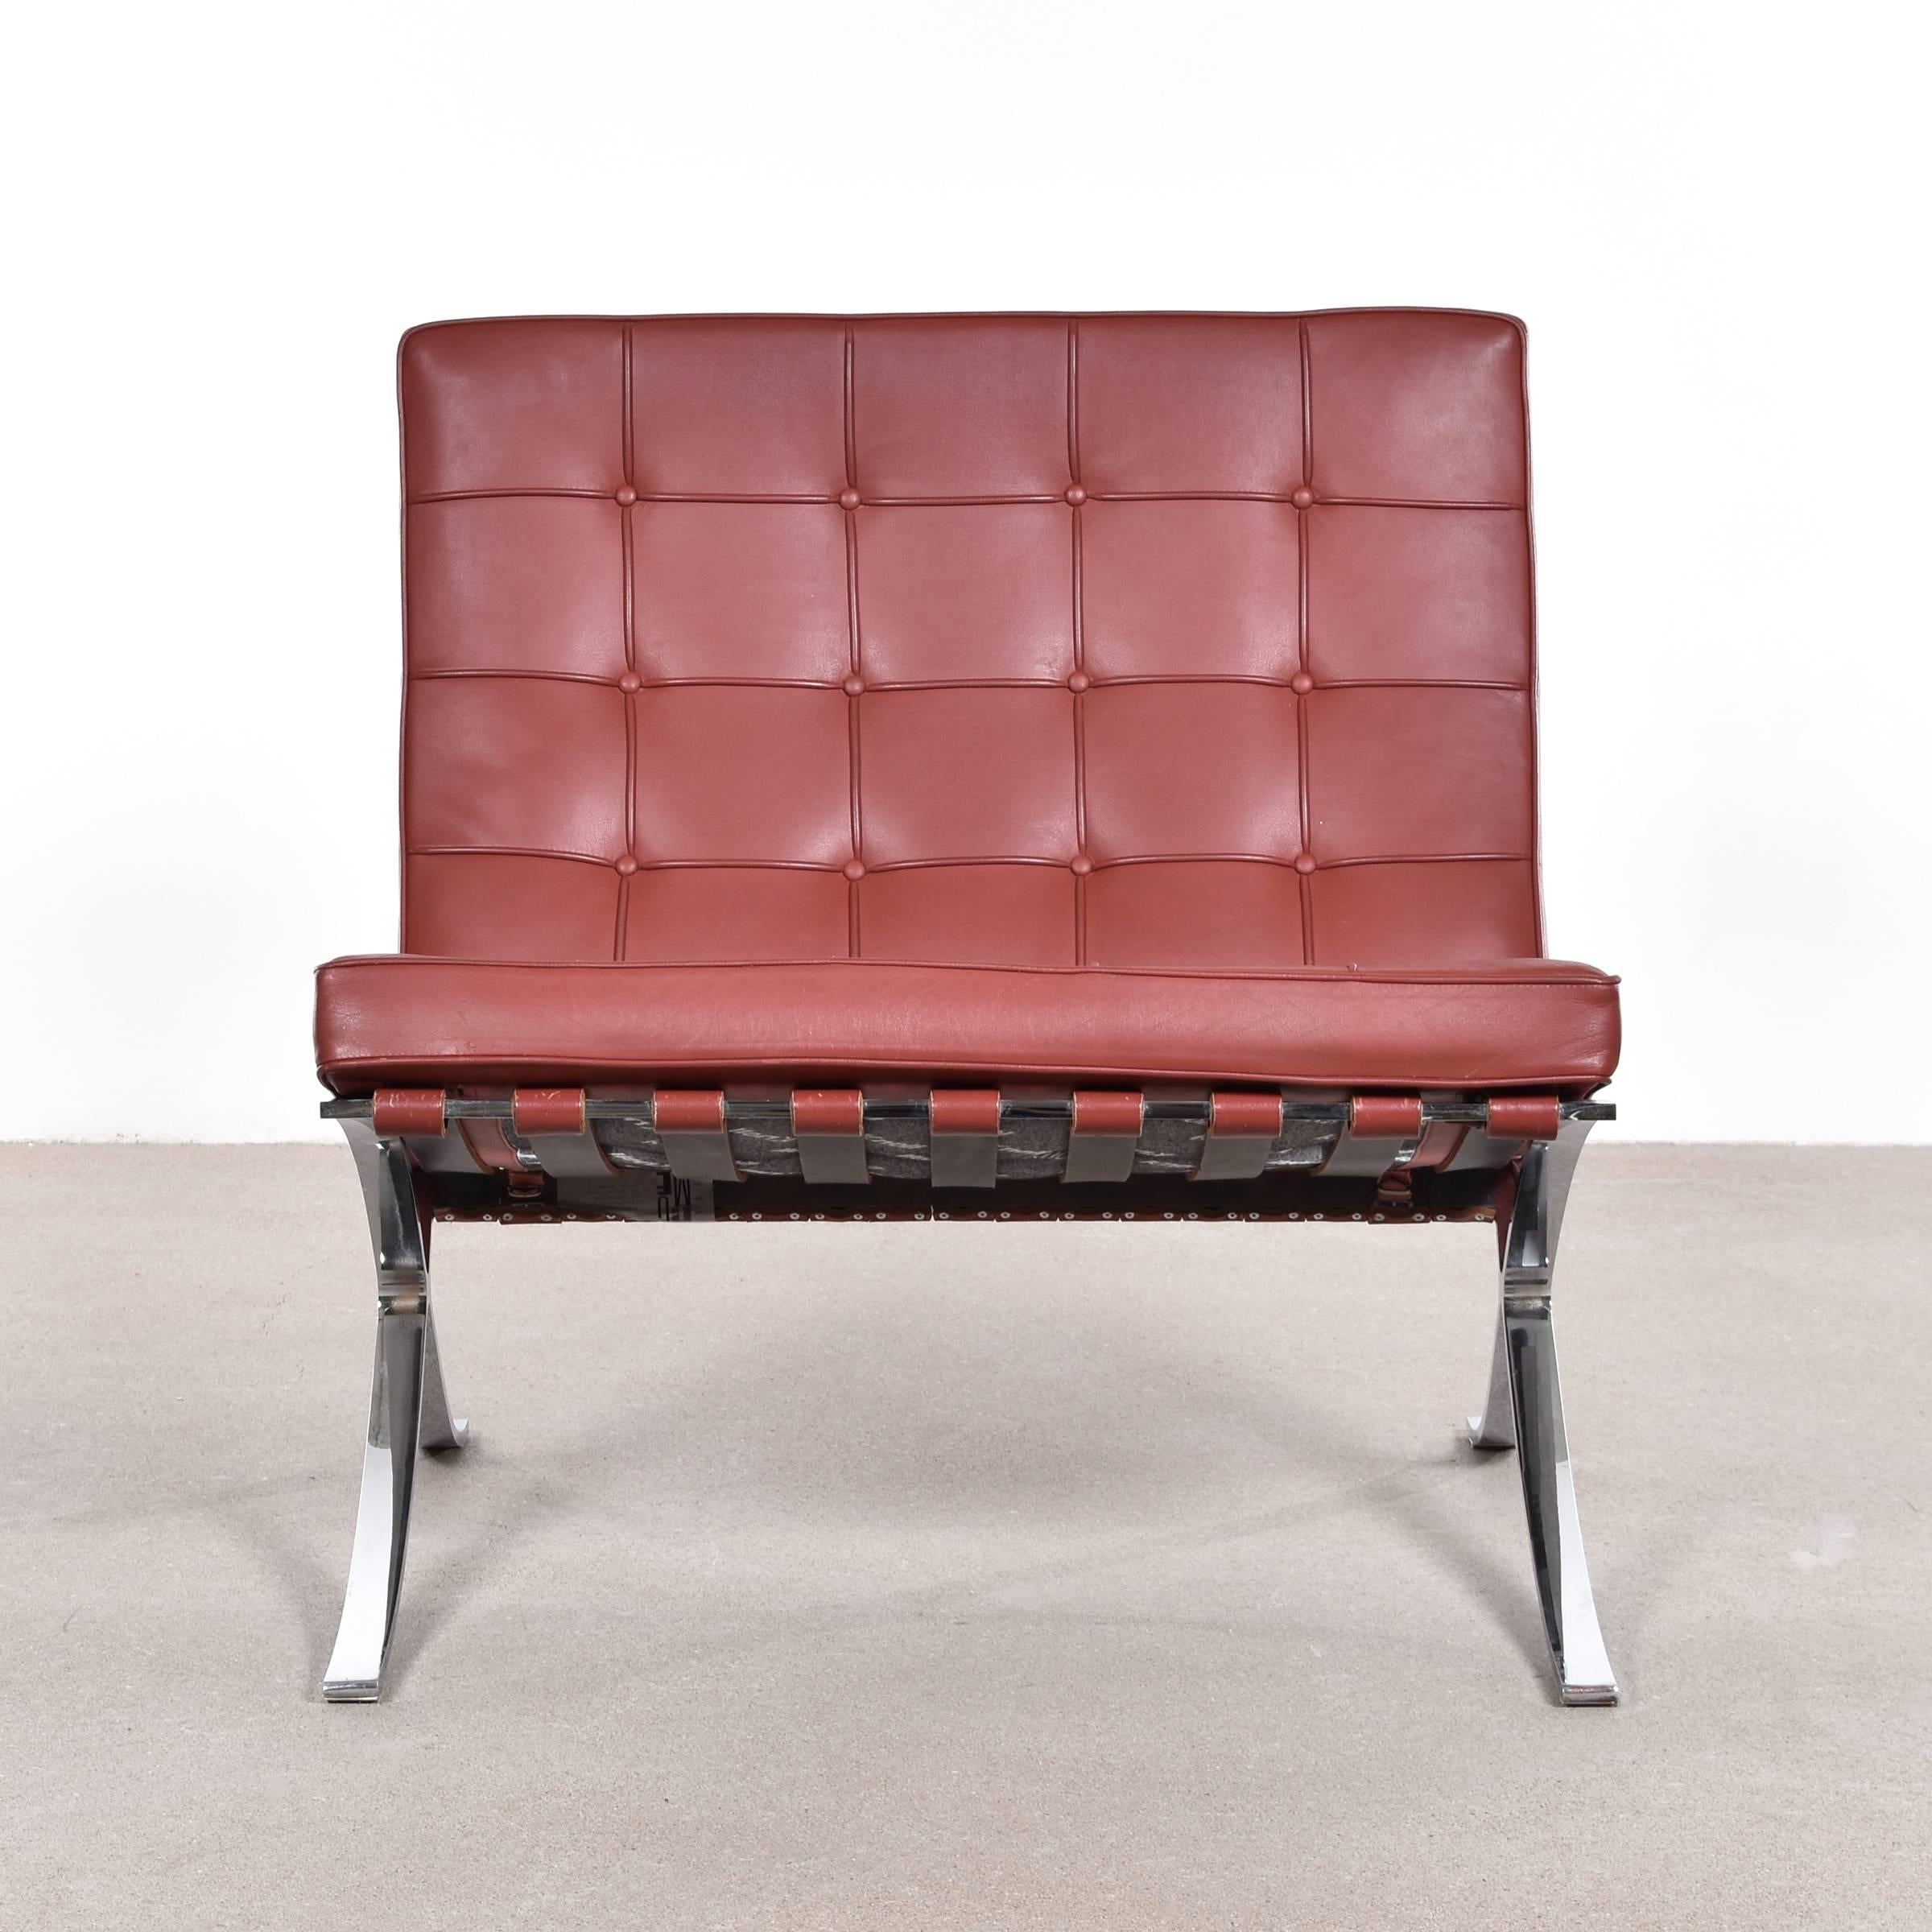 Iconic and famous set of four Ludwig Mies van der Rohe Barcelona lounge chairs. Very good original condition with red brown leather. Signed with manufacturer's label and engraving.

Free shipping for European destinations!

We strive for a high